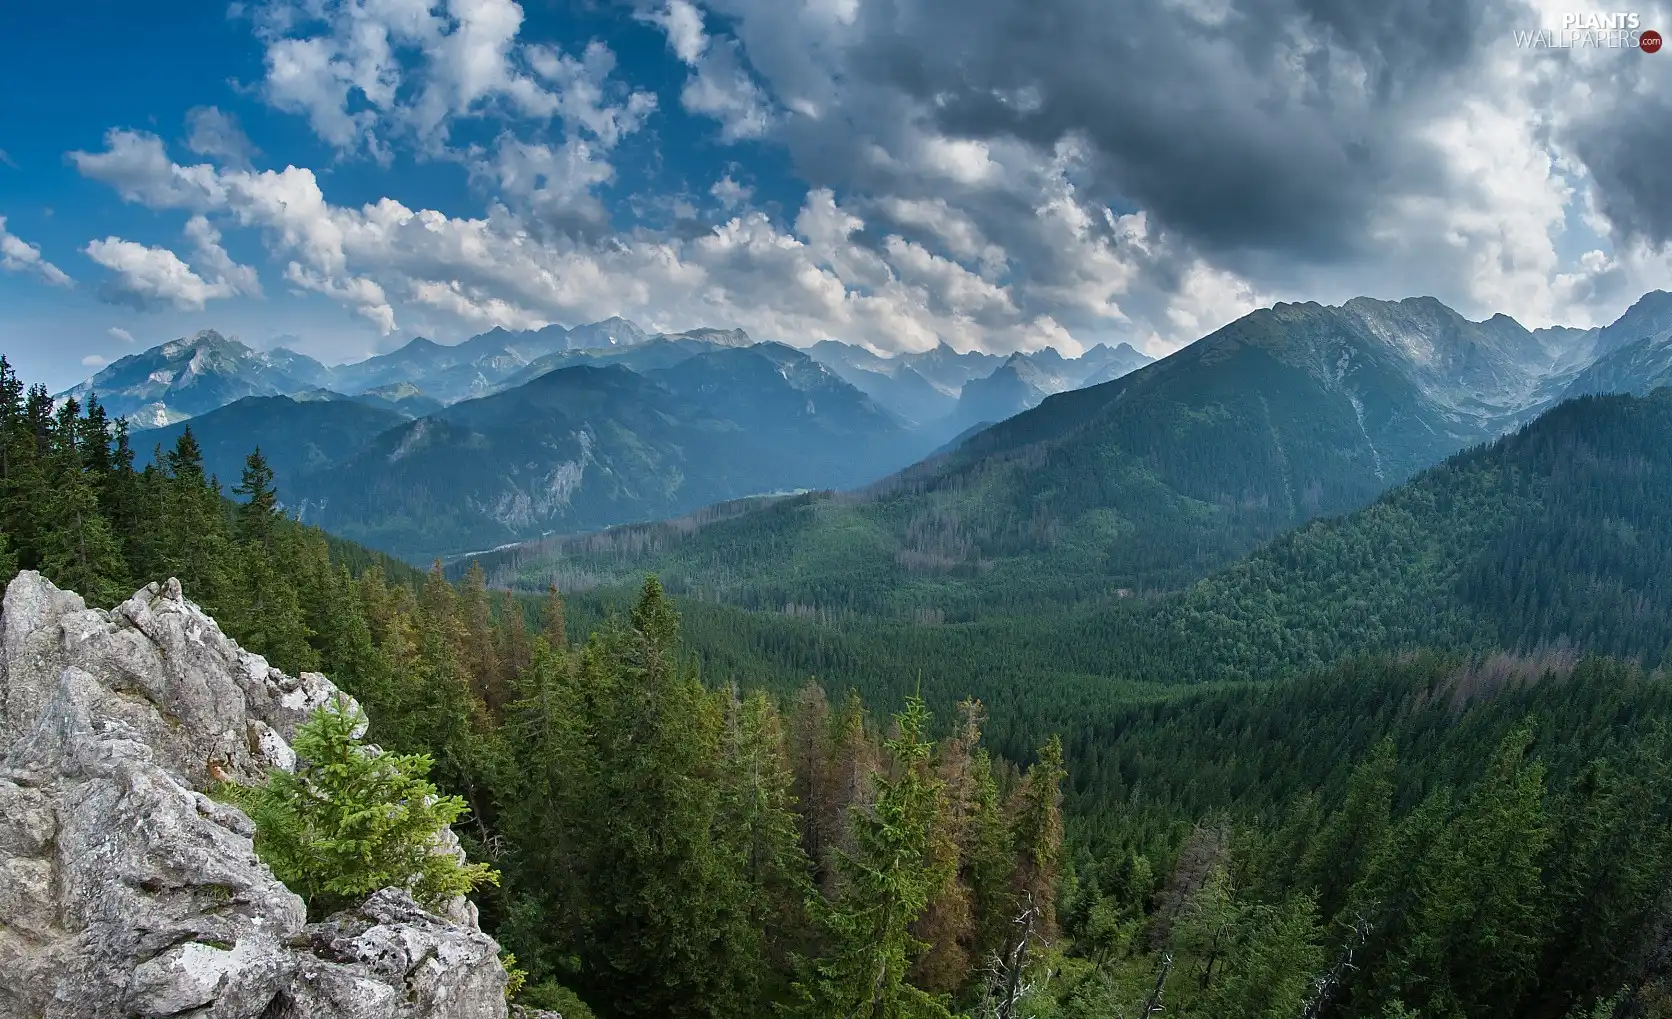 Mountains, trees, viewes, clouds